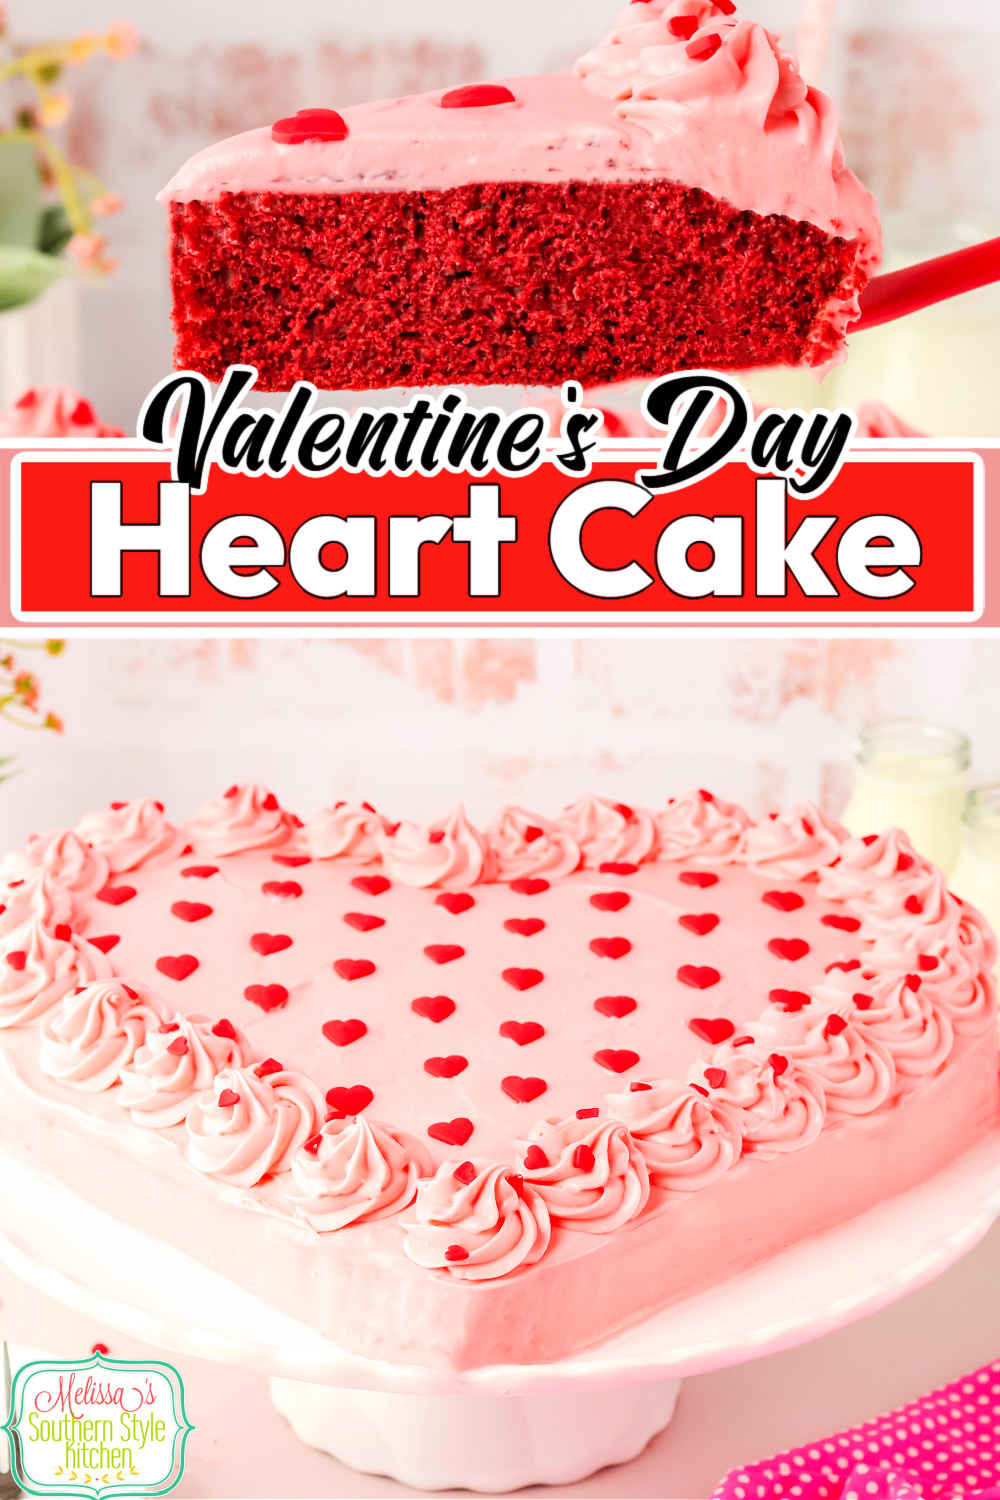 This pretty Heart Shaped Cake is a delicious way to show your loved ones how much you care. No special pan needed! #valentine'sday #heartshapedcakerecipe #redvelvetcake #holidaydesserts #chocolatecake #heartcakerecipe via @melissasssk